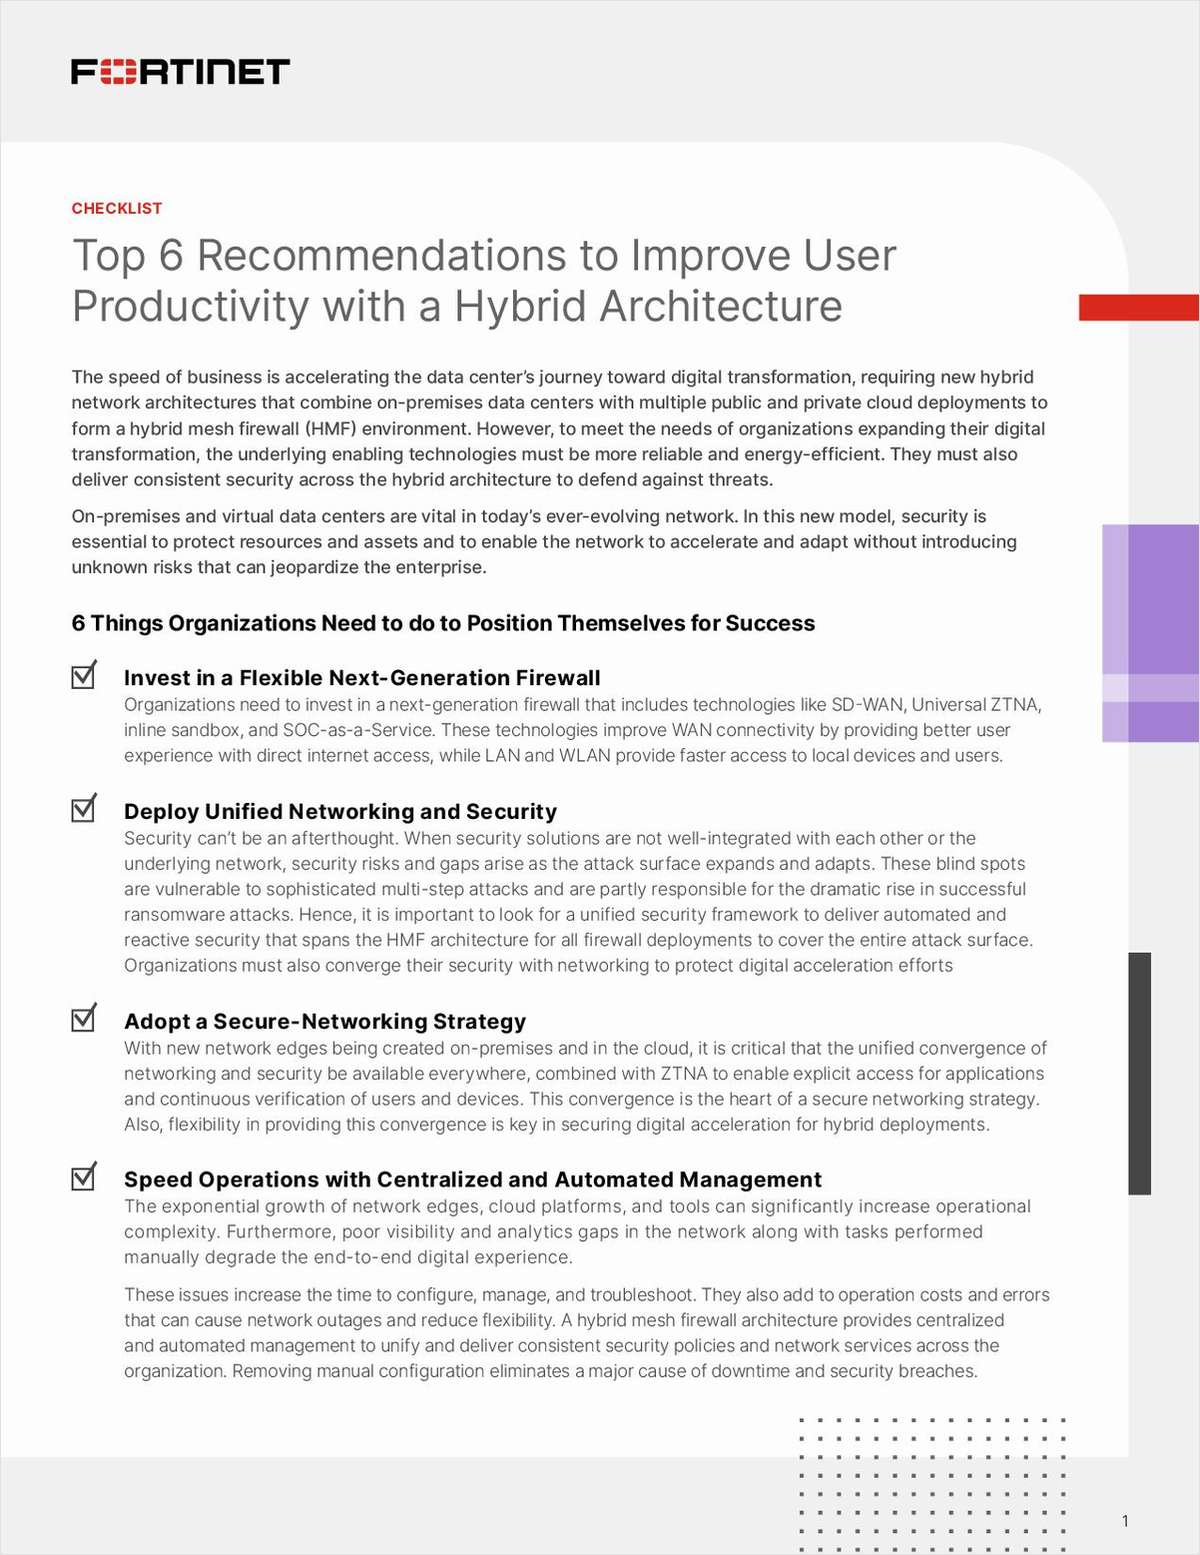 Top Six Recommendations to Improve User Productivity with a Hybrid Architecture